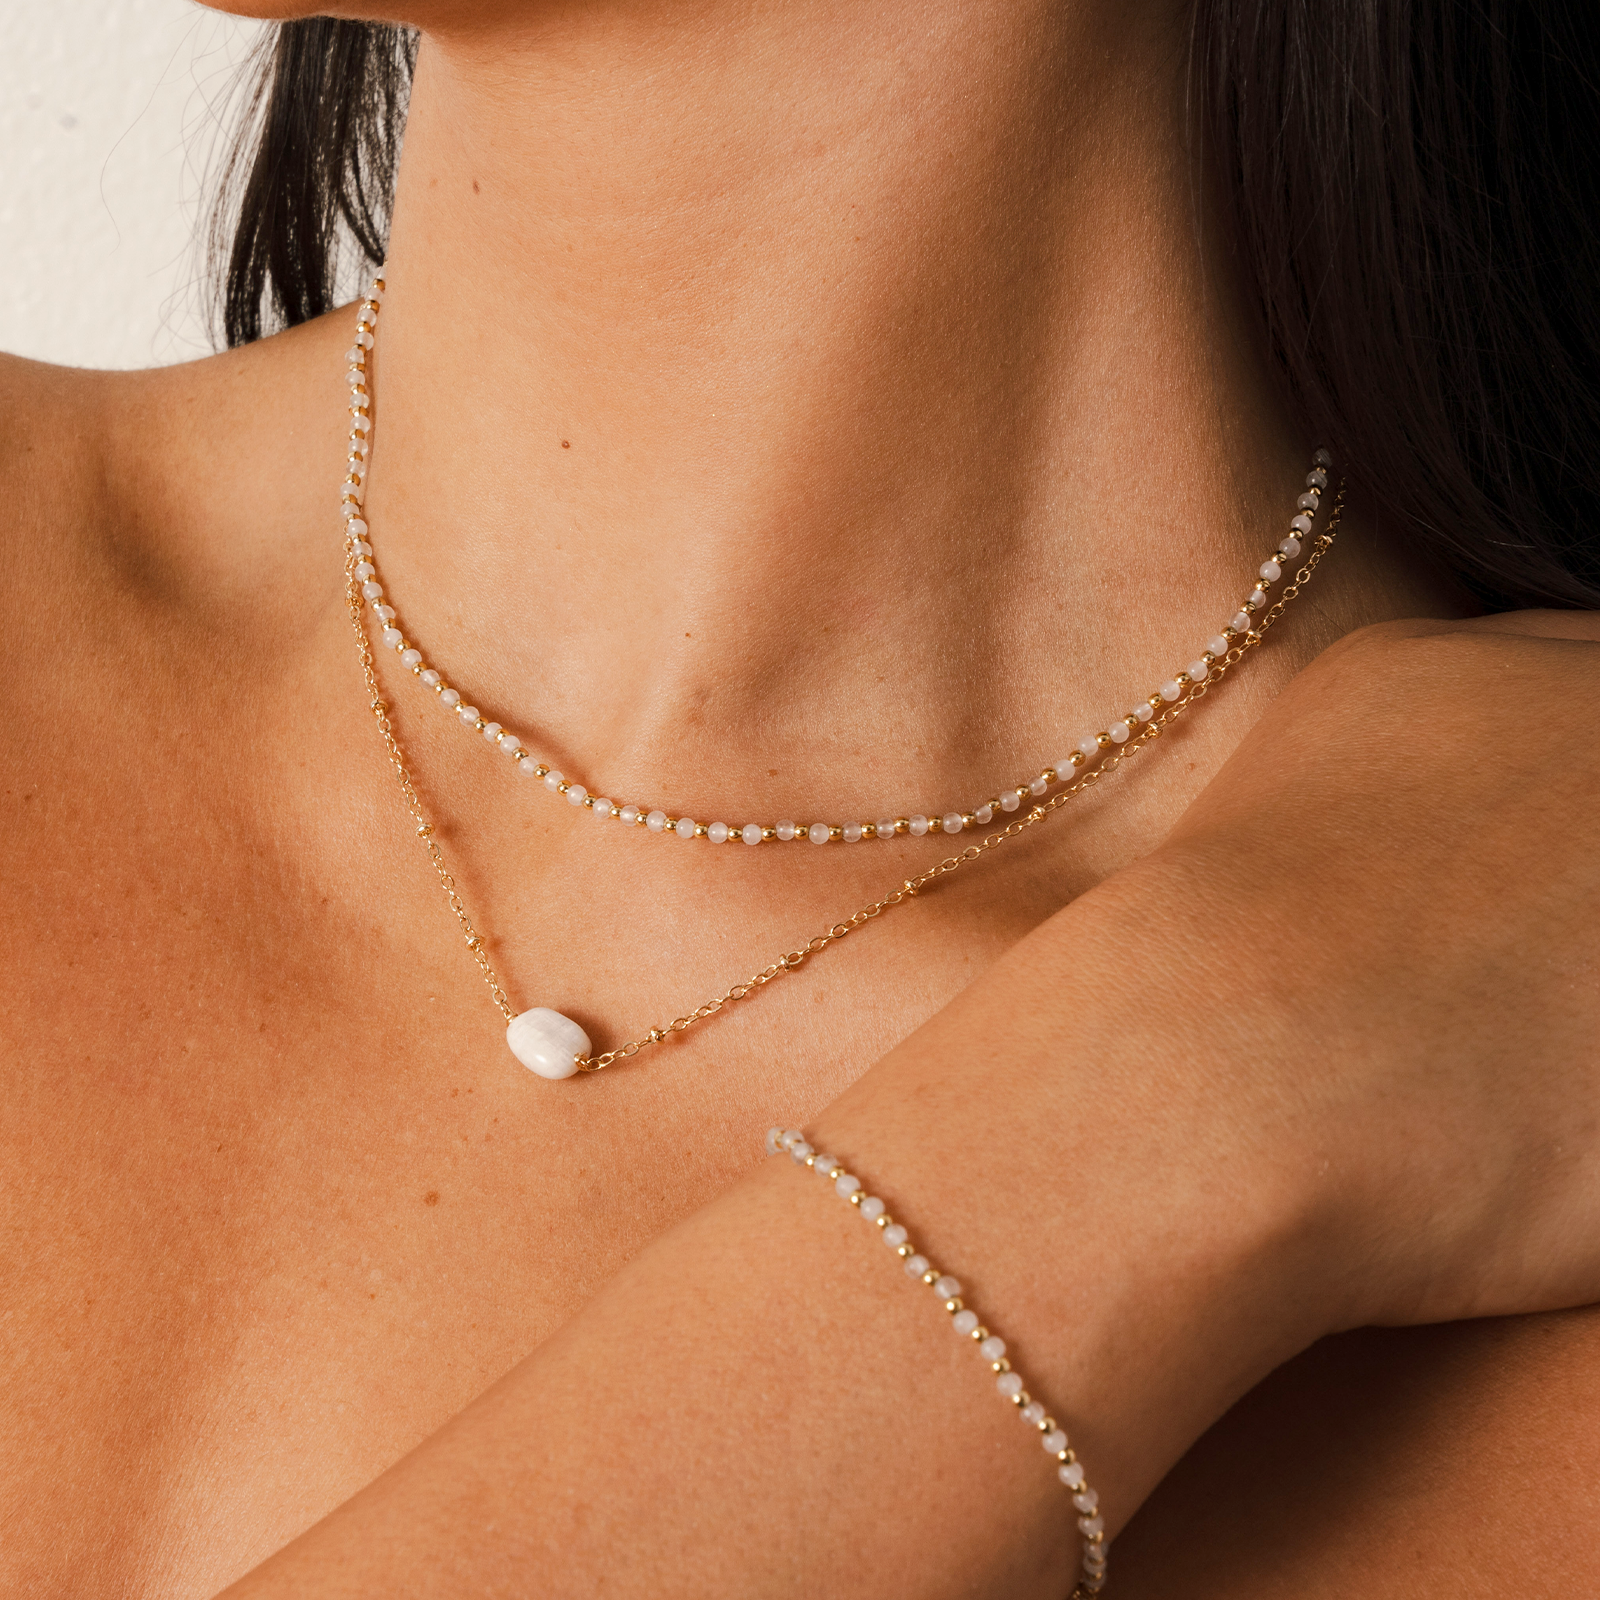 Model wearing a necklace stack. The stack consists of a 2mm moonstone and gold bead healing necklace and a moonstone healing necklace with a gold chain